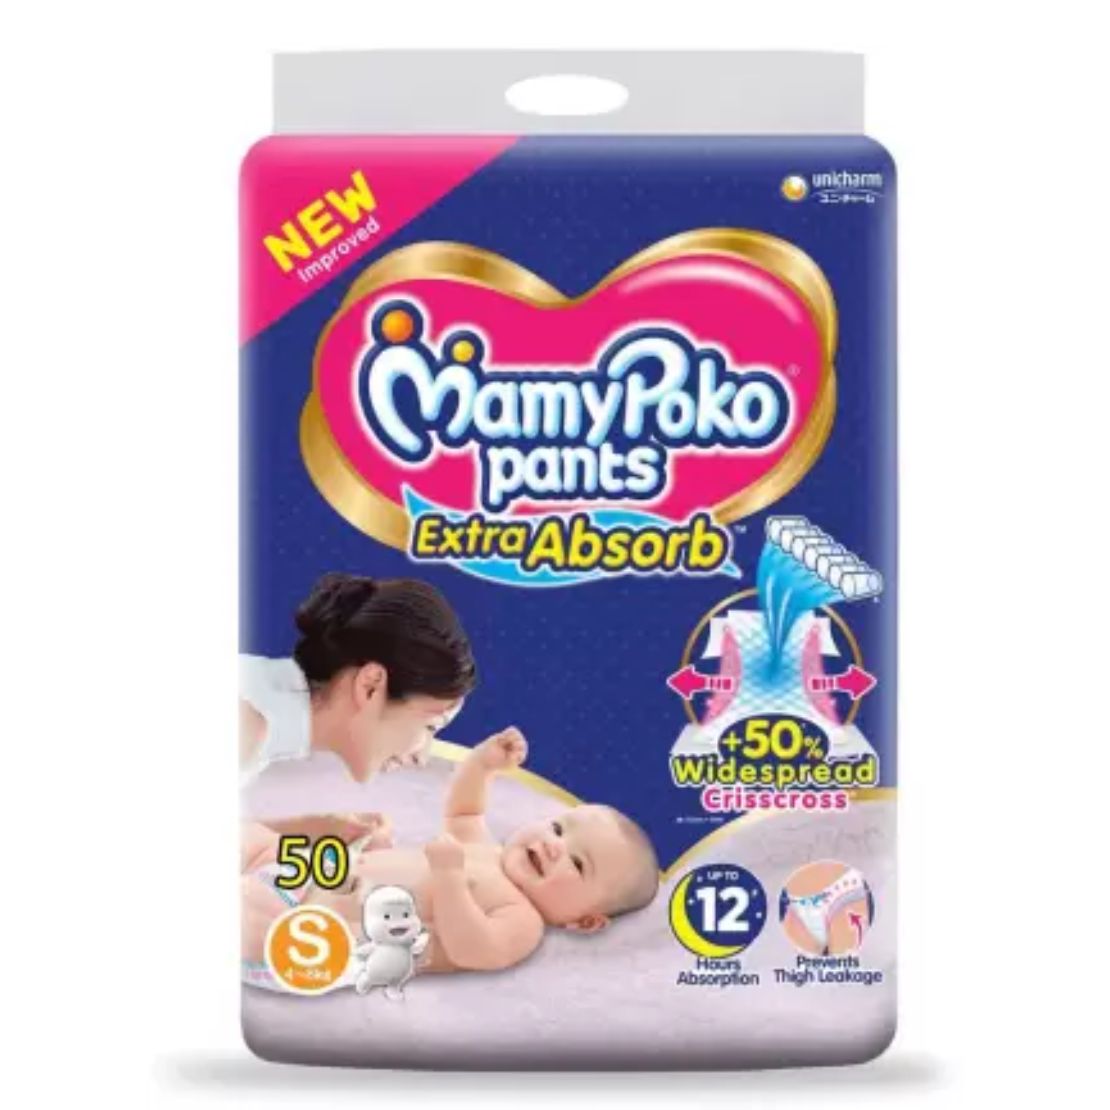 MamyPoko Pants Extra Absorb Diaper - Small Size